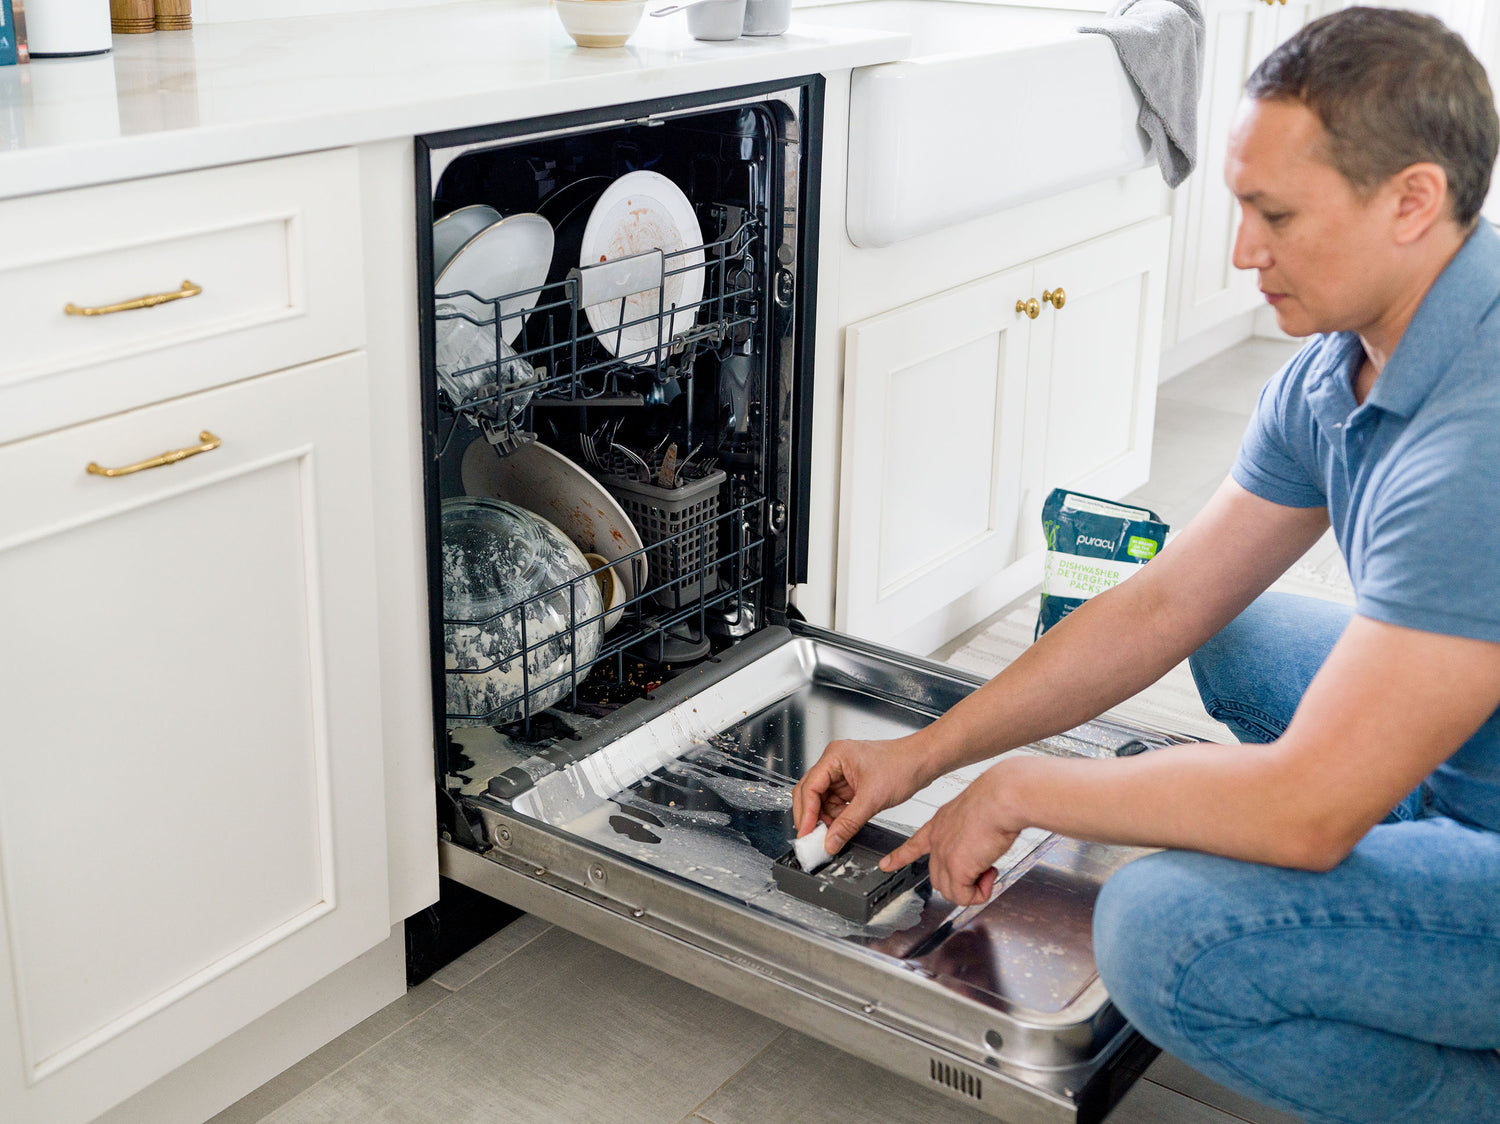 How Do You Keep a Dishwasher From Smelling Between Washes?